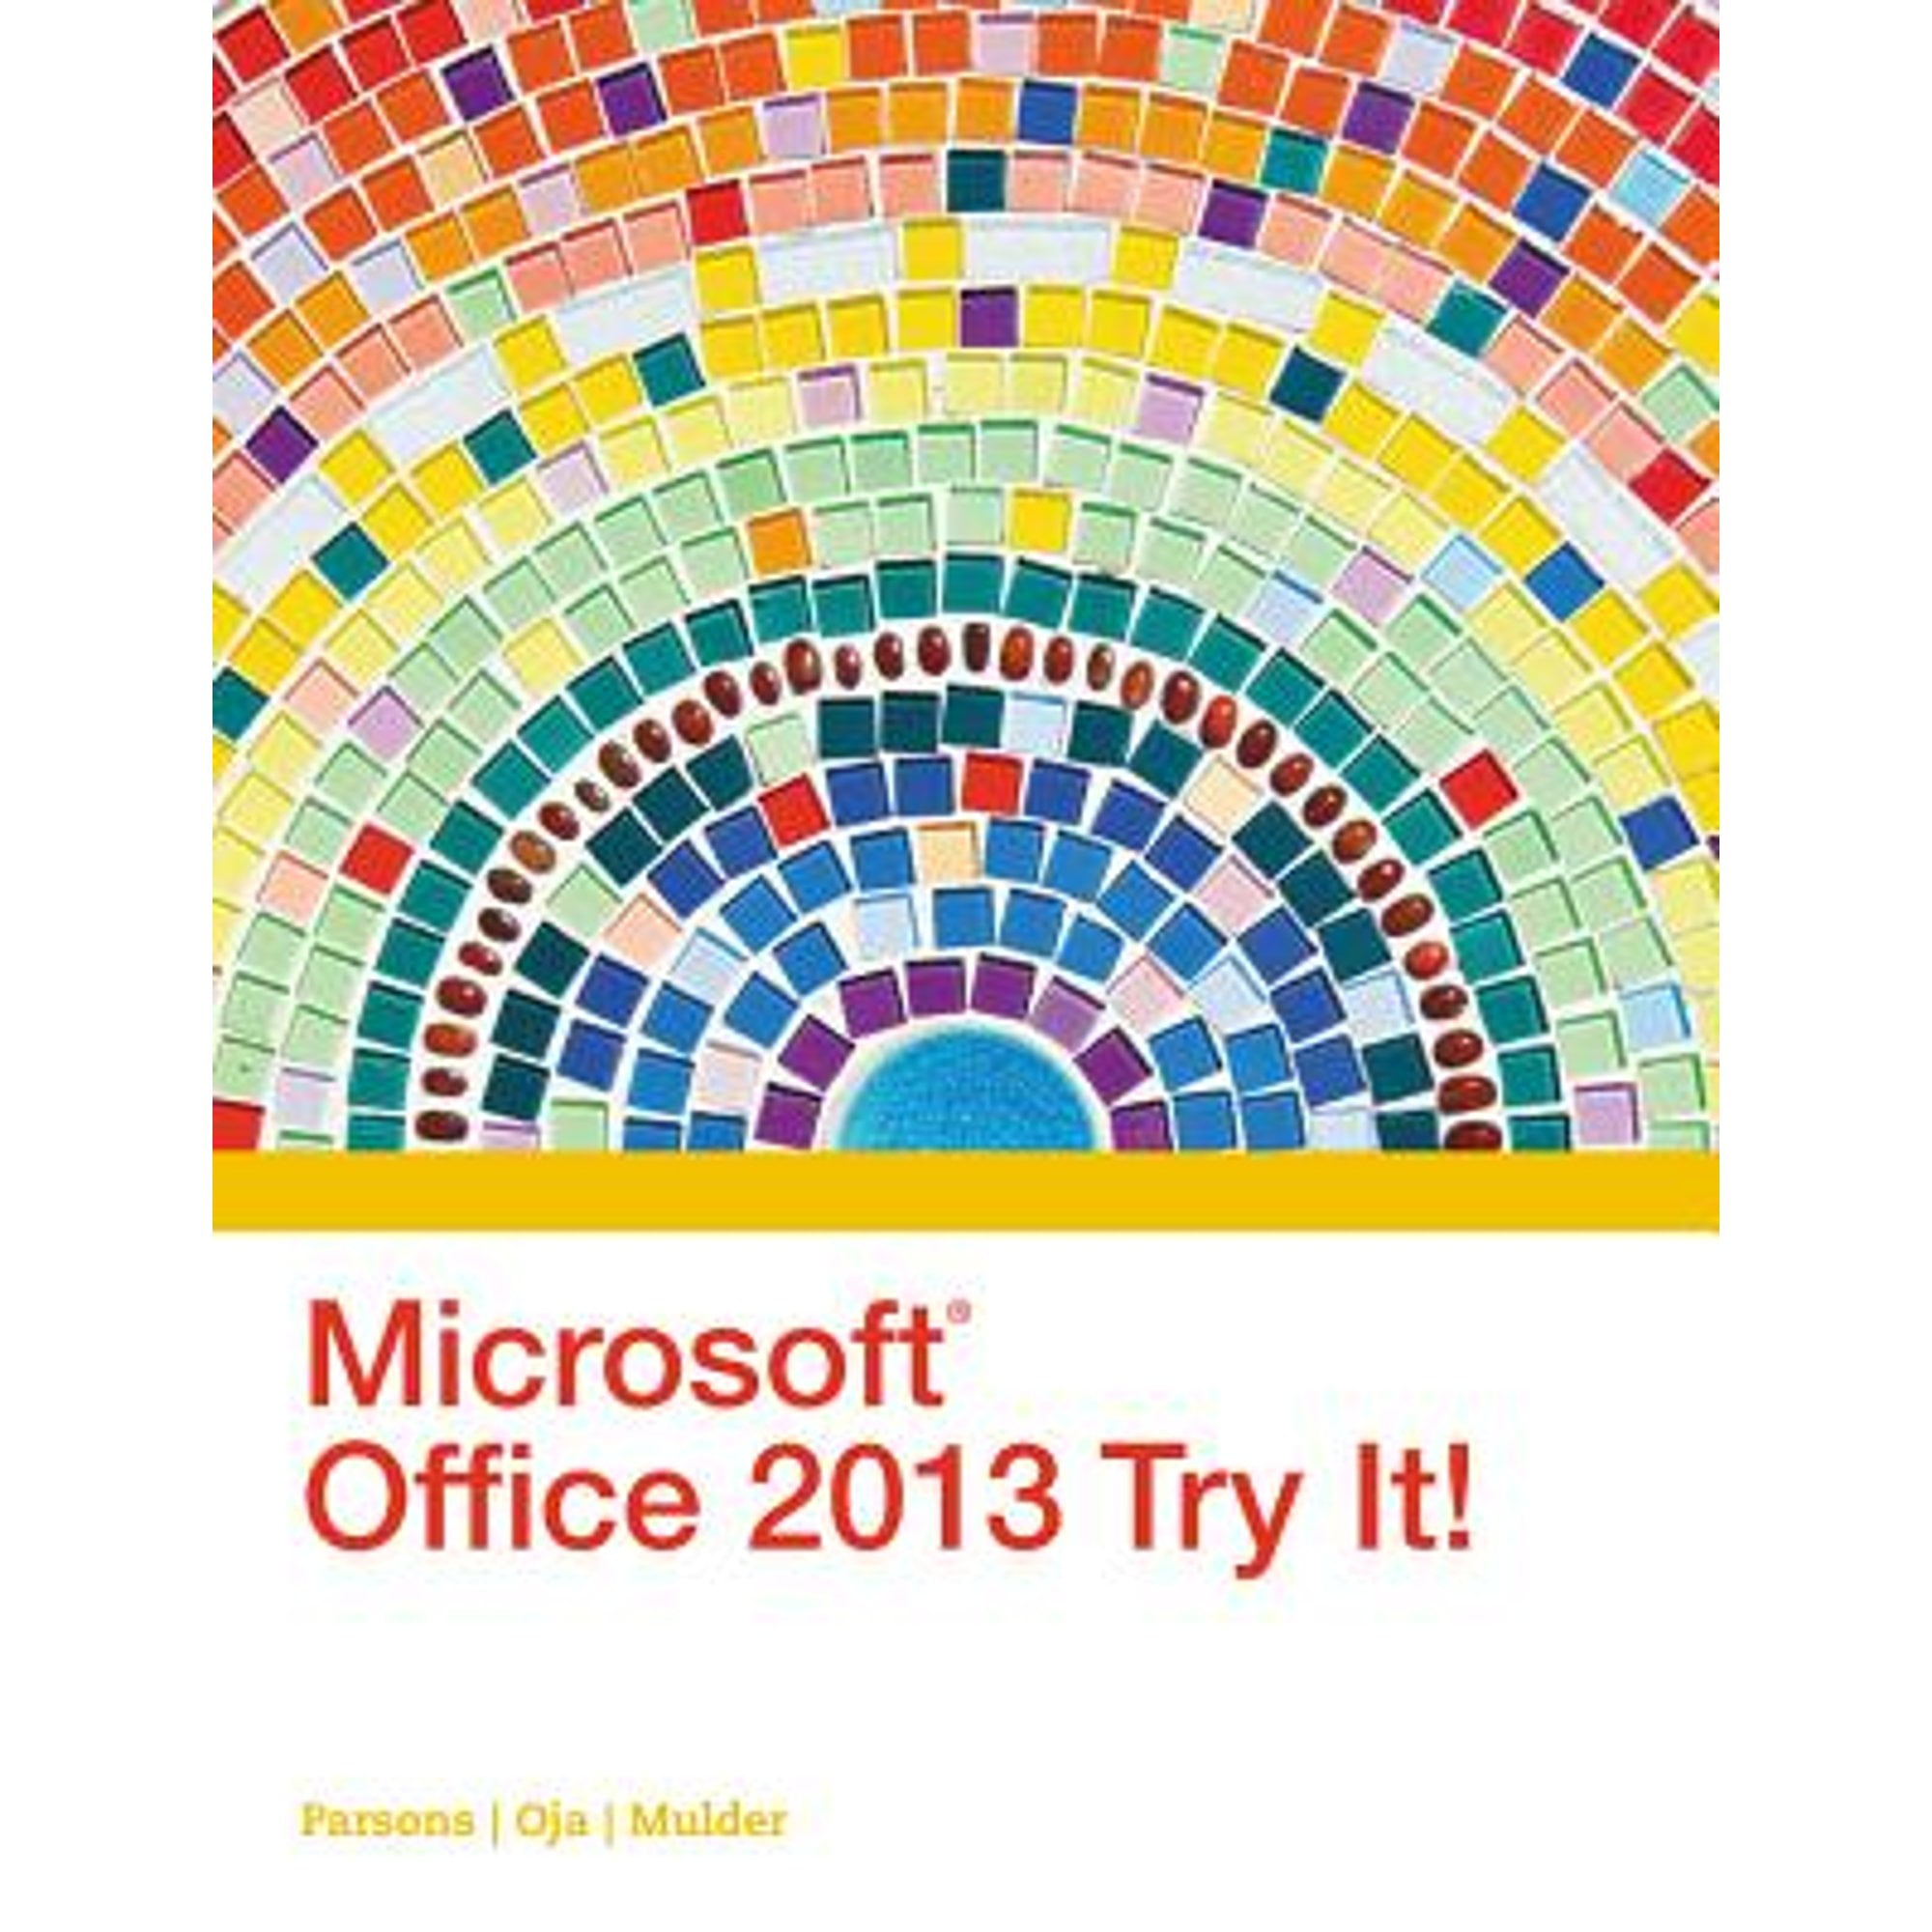 Pre-Owned Microsoft Office 2013 Try It!  New Perspectives Paperback June Jamrich Parsons, Dan Oja